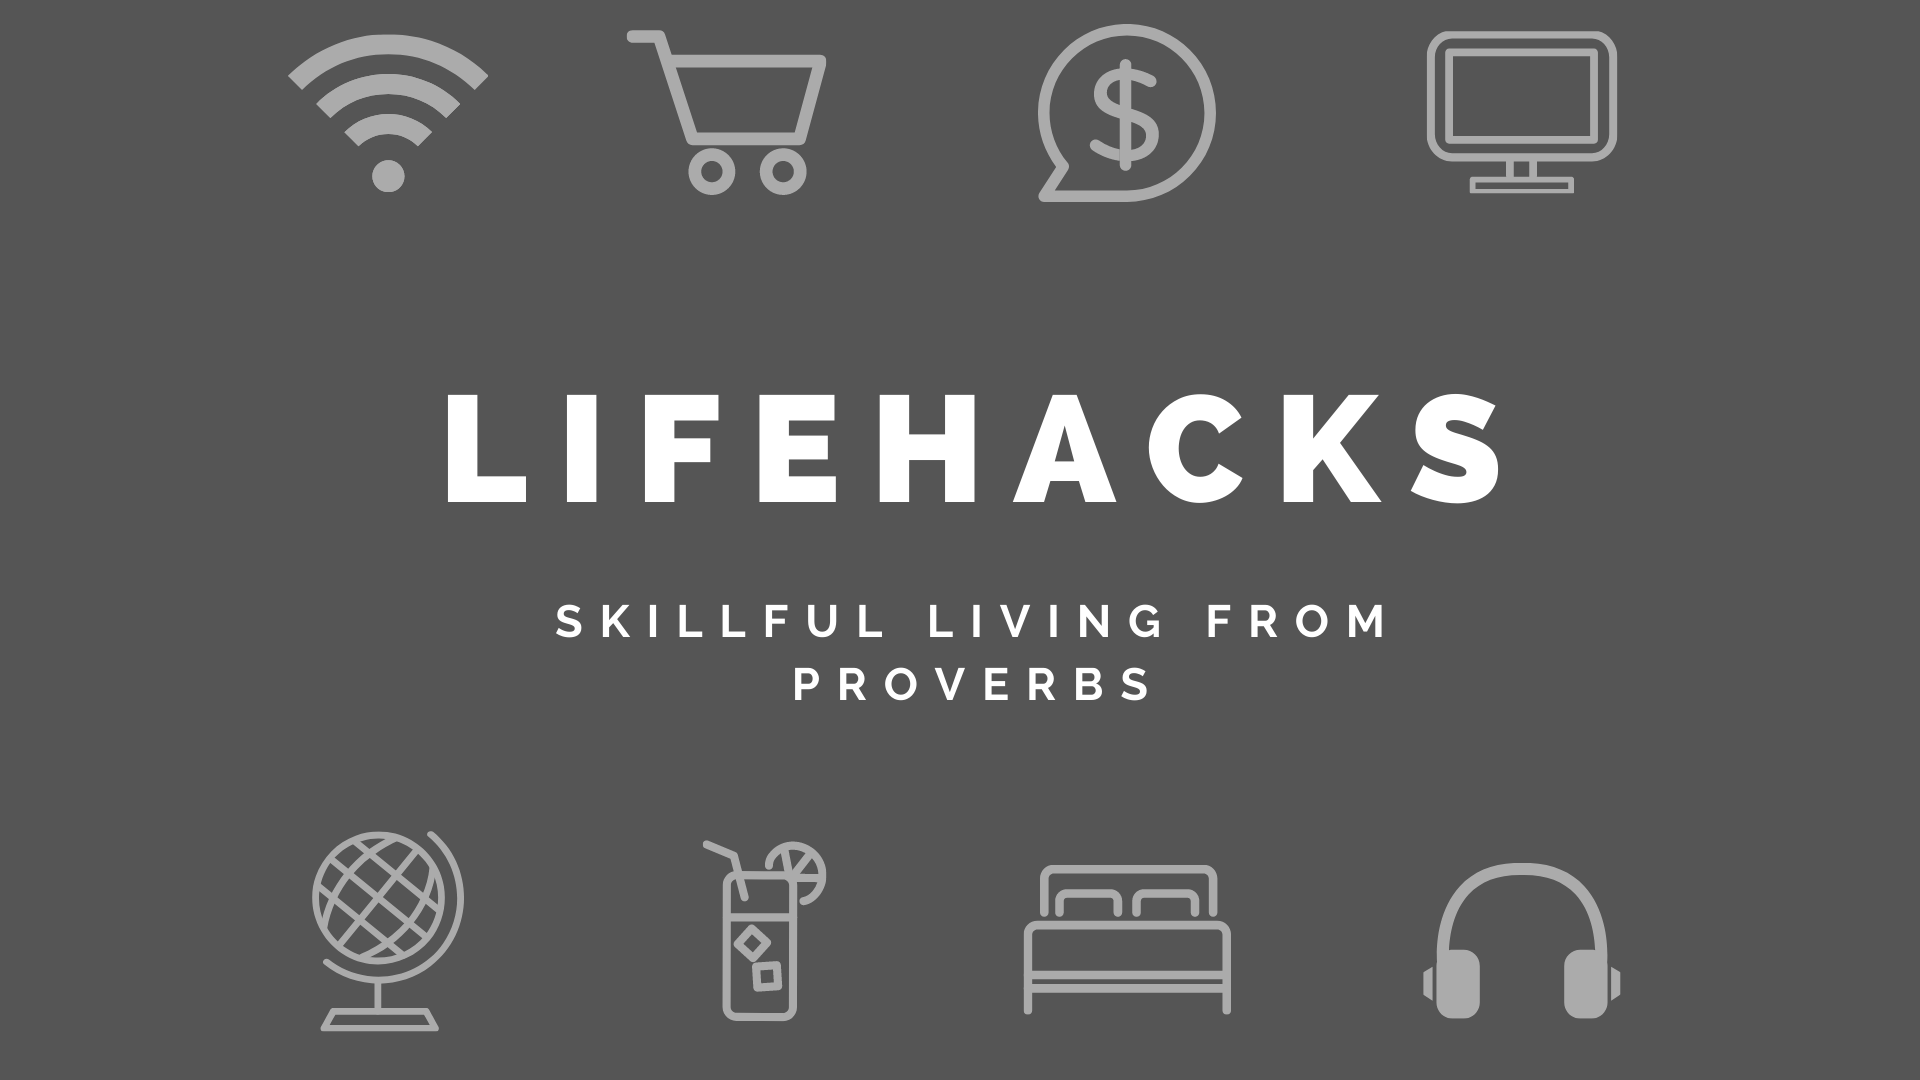 Lifehacks: Skillful Living from Proverbs